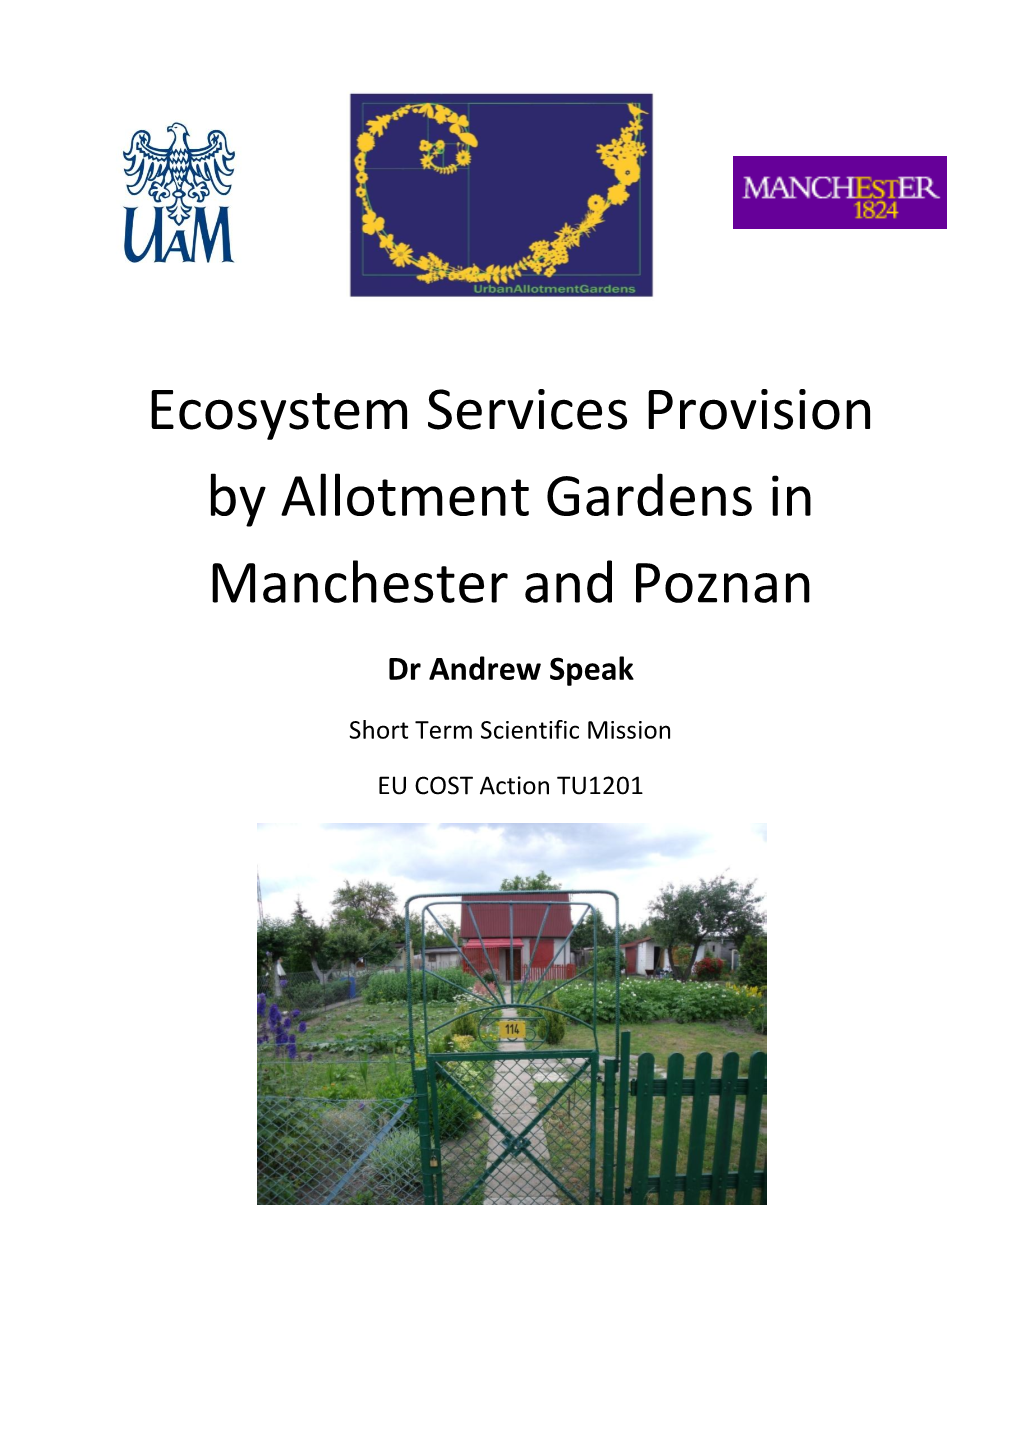 Ecosystem Services Provision by Allotment Gardens in Manchester and Poznan